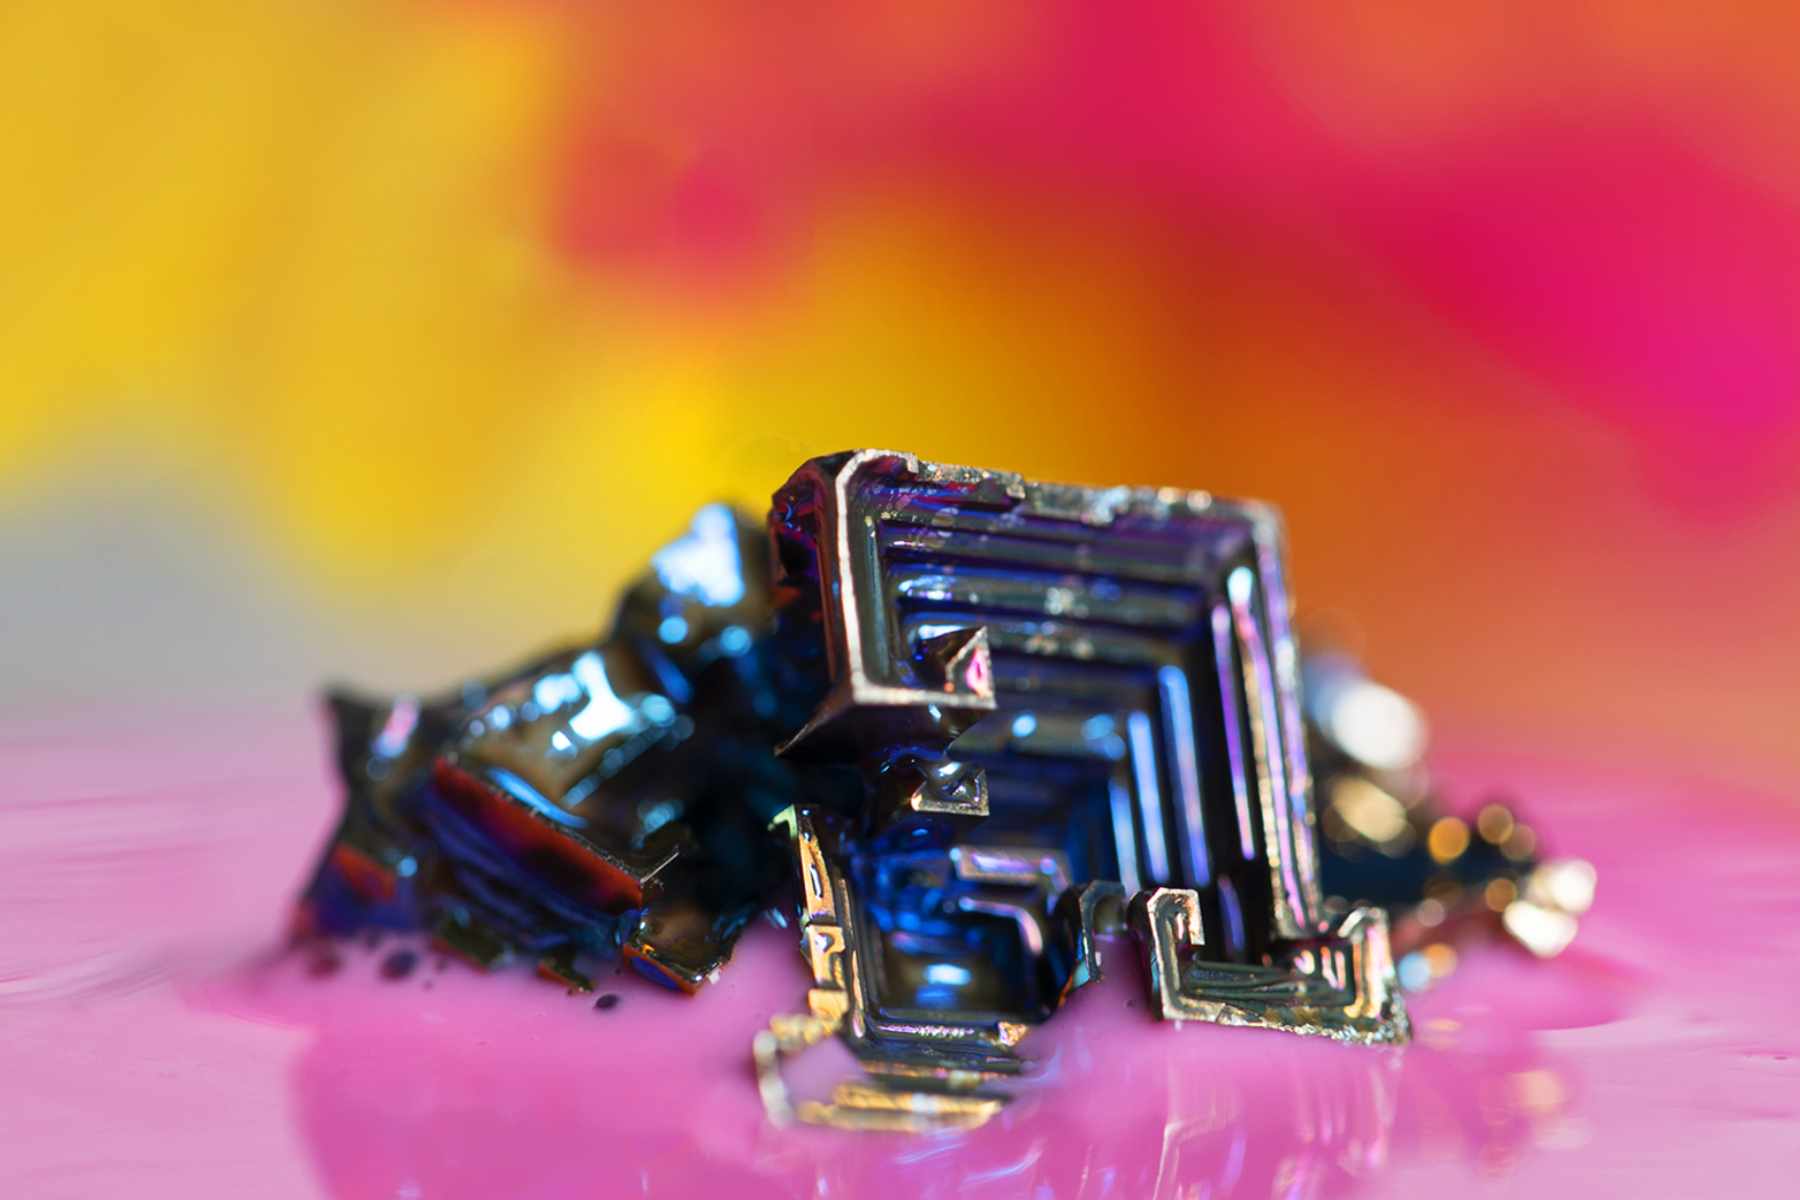 A photograph of a Bismuth crystal placed on a vibrant and colorful background